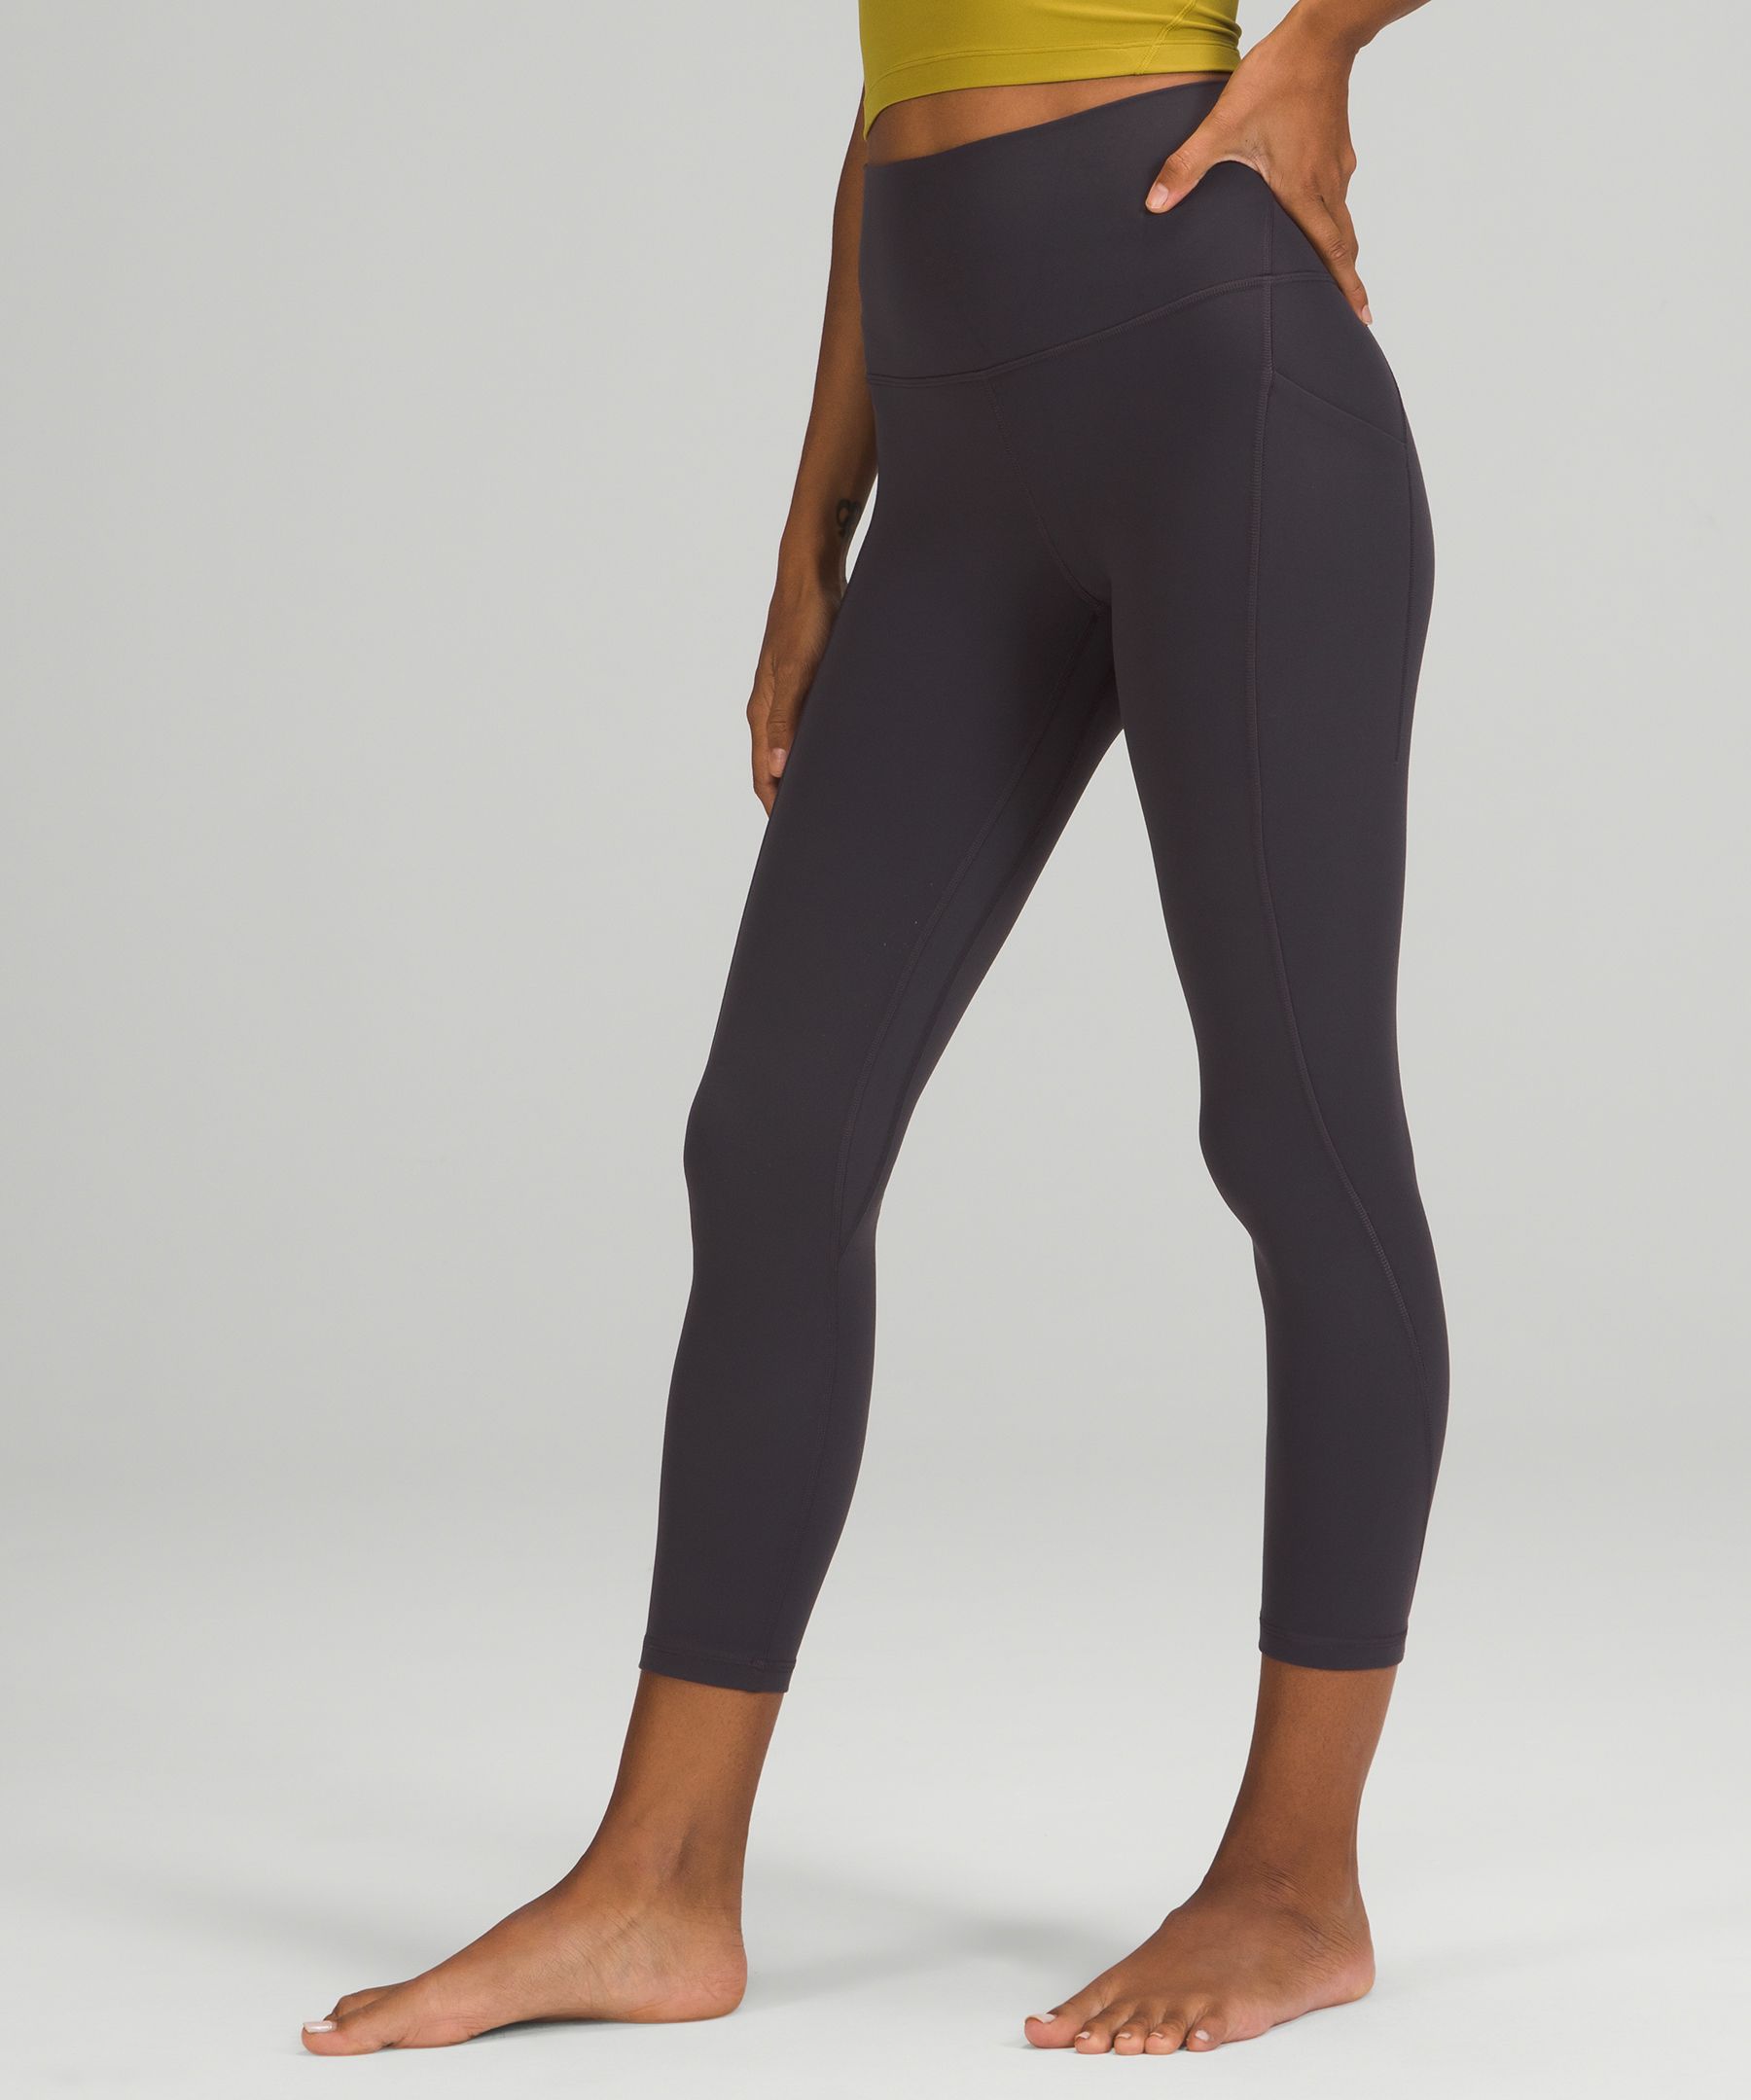 PSA: Lululemon's Align Leggings With Pockets Will *Actually